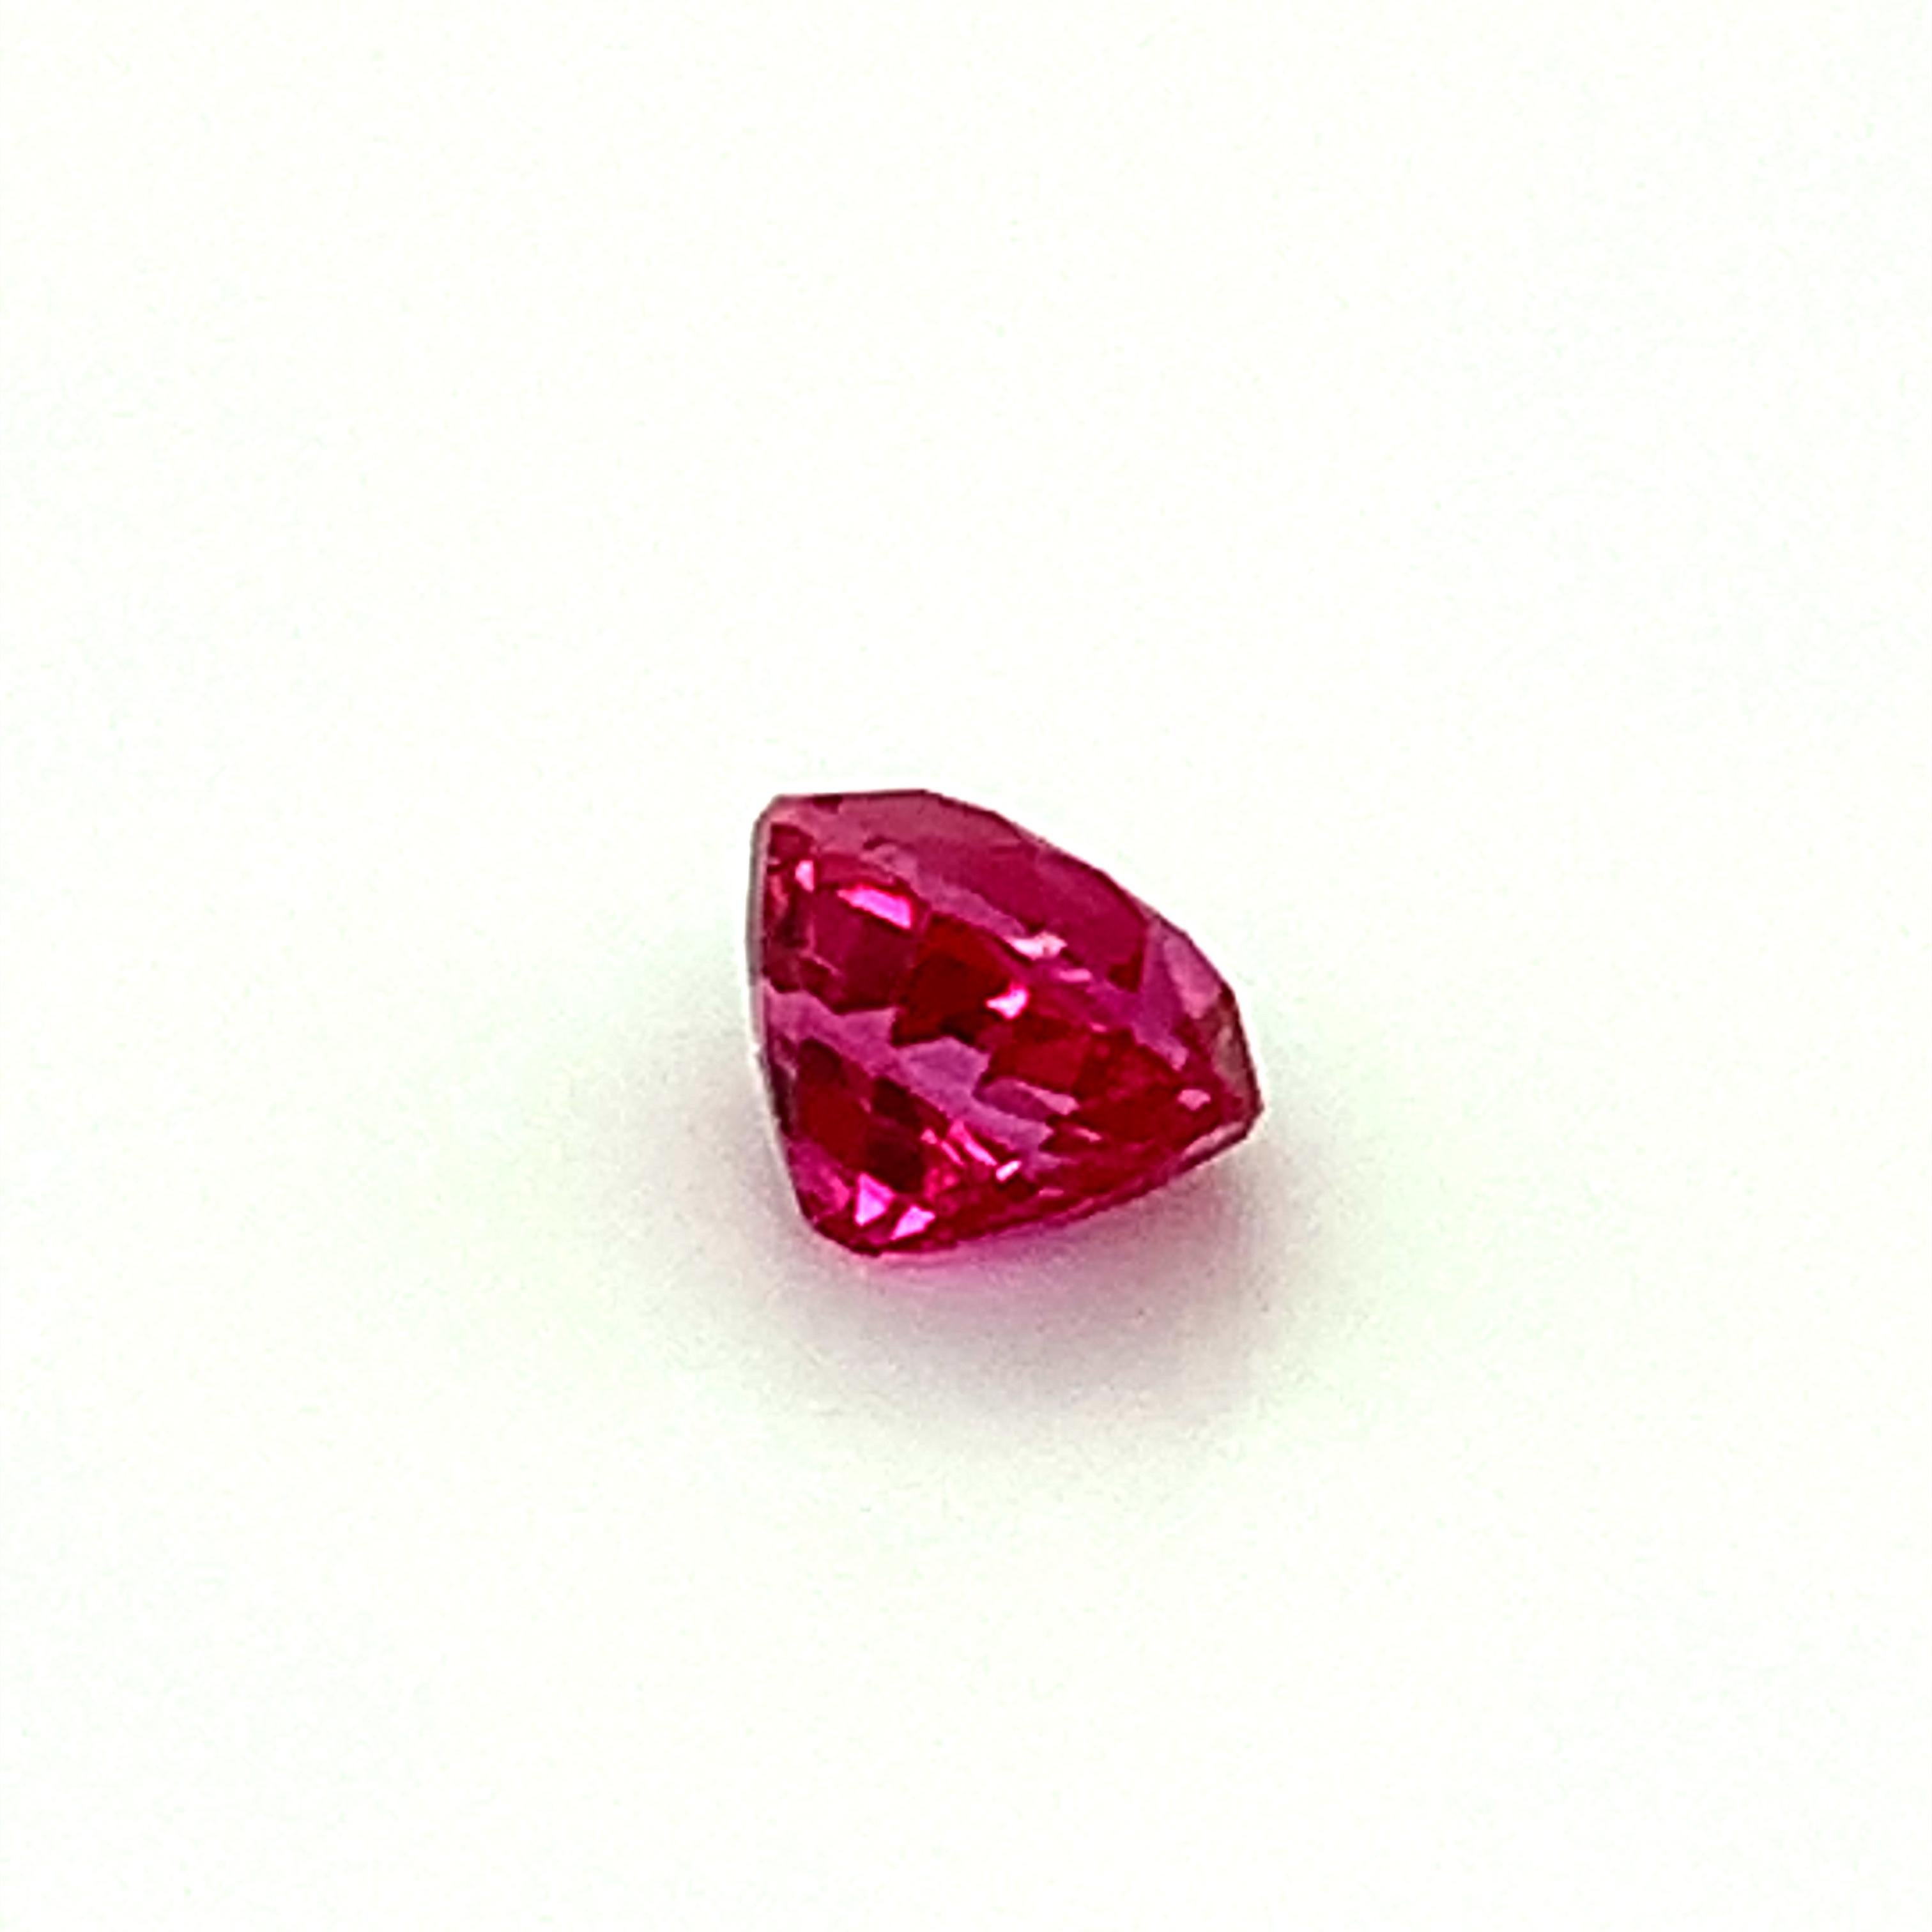 Women's or Men's Unheated 1.08 Carat Burmese Ruby Oval GIA Unset 3-Stone Engagement Ring Gemstone